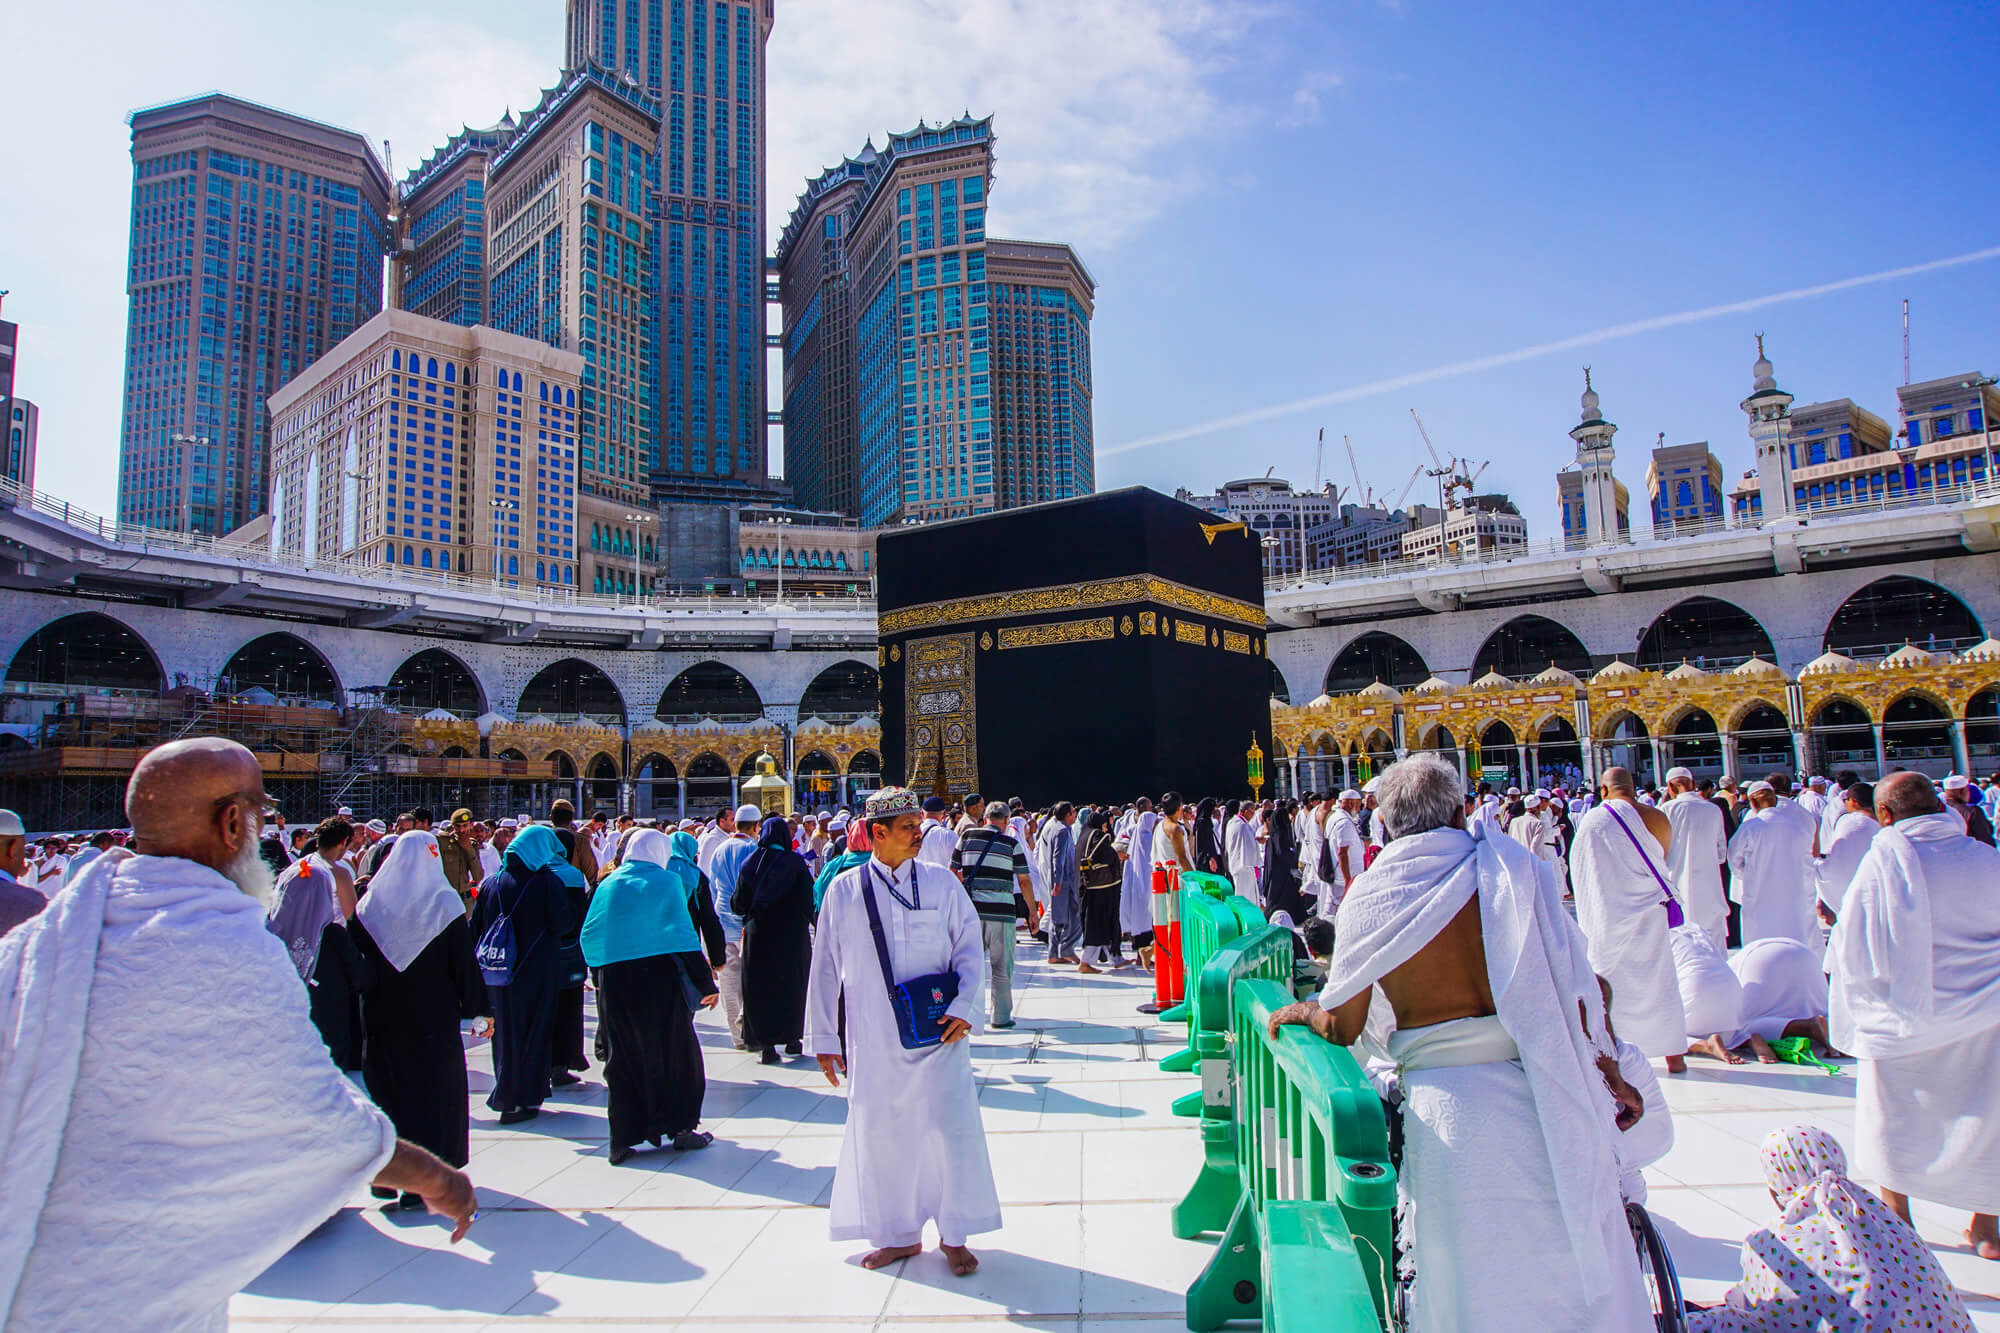 Kaaba when Performing Prayer, Mecca